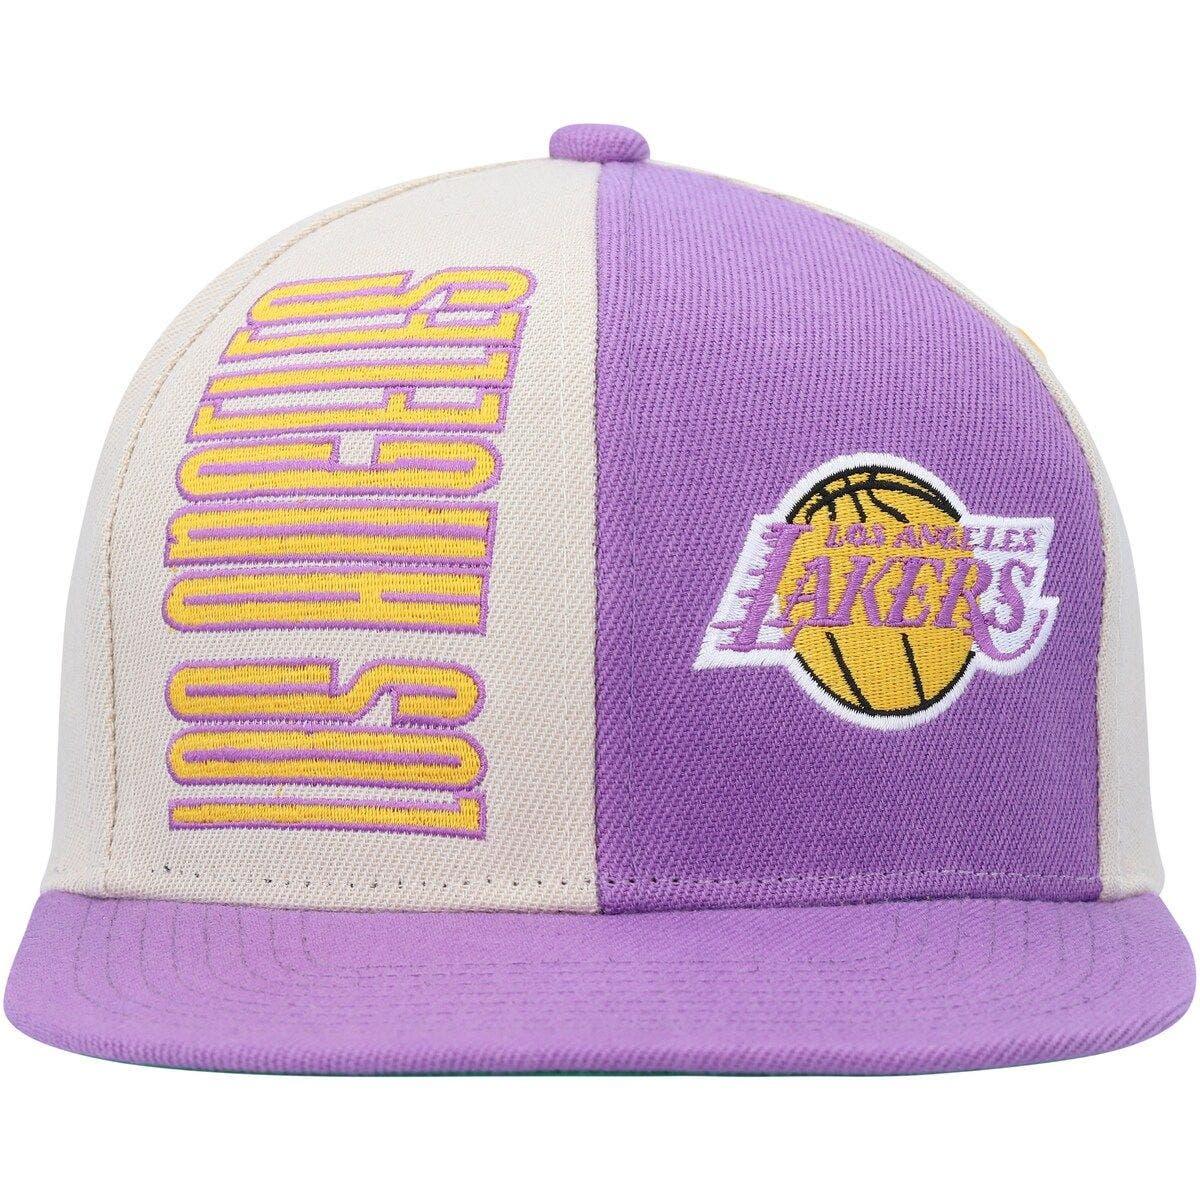 Lids Los Angeles Lakers Mitchell & Ness Hardwood Classics Back to Back  '87-'88 Champions Adjustable Dad Hat - Purple